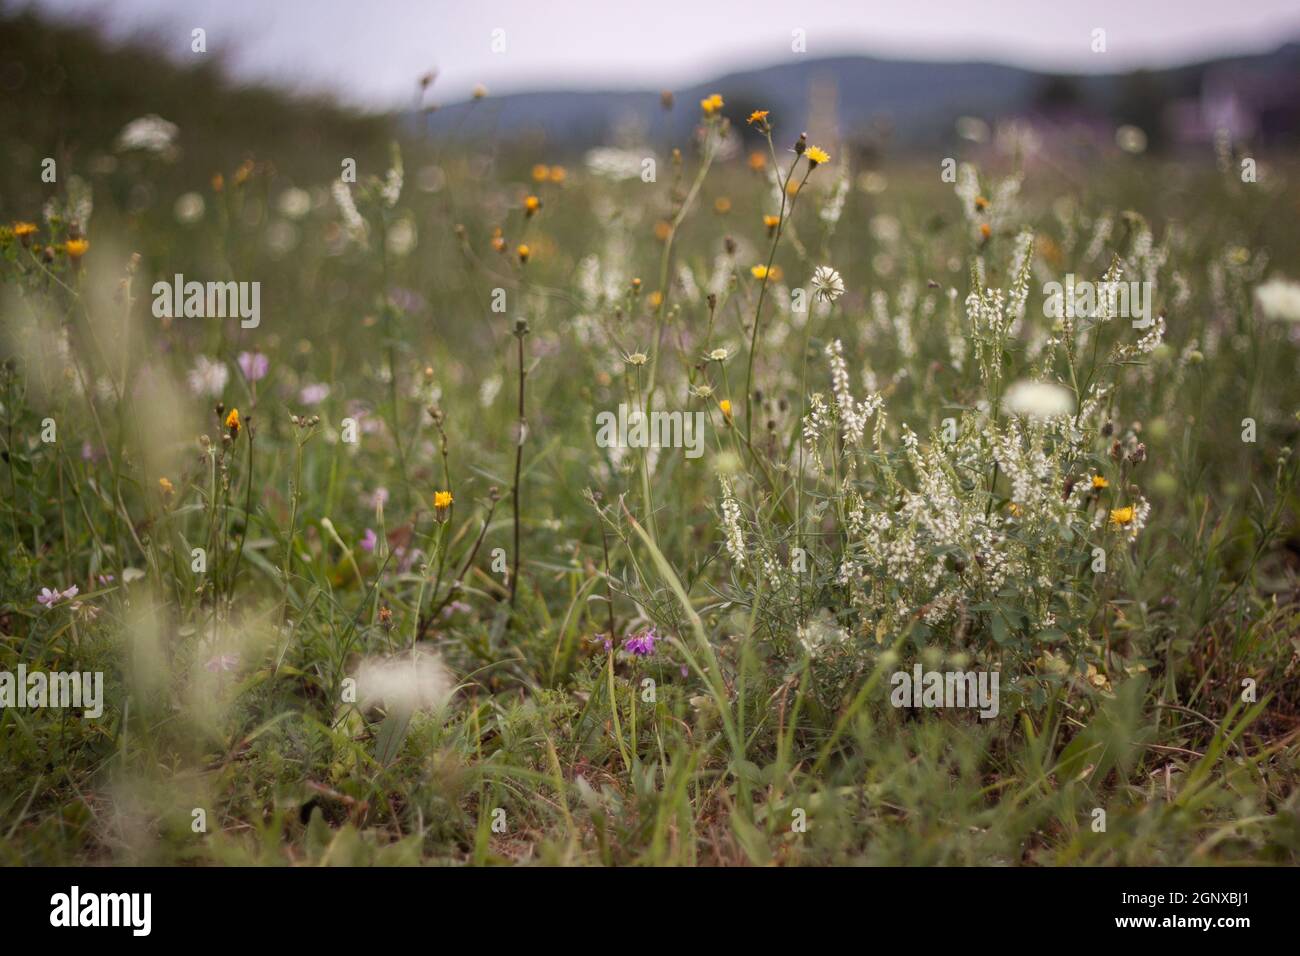 Meadow with yellow, pink and white flowers close up | Beautiful abundant in flowers meadow on cloudy weather with sky and mountains in the background Stock Photo